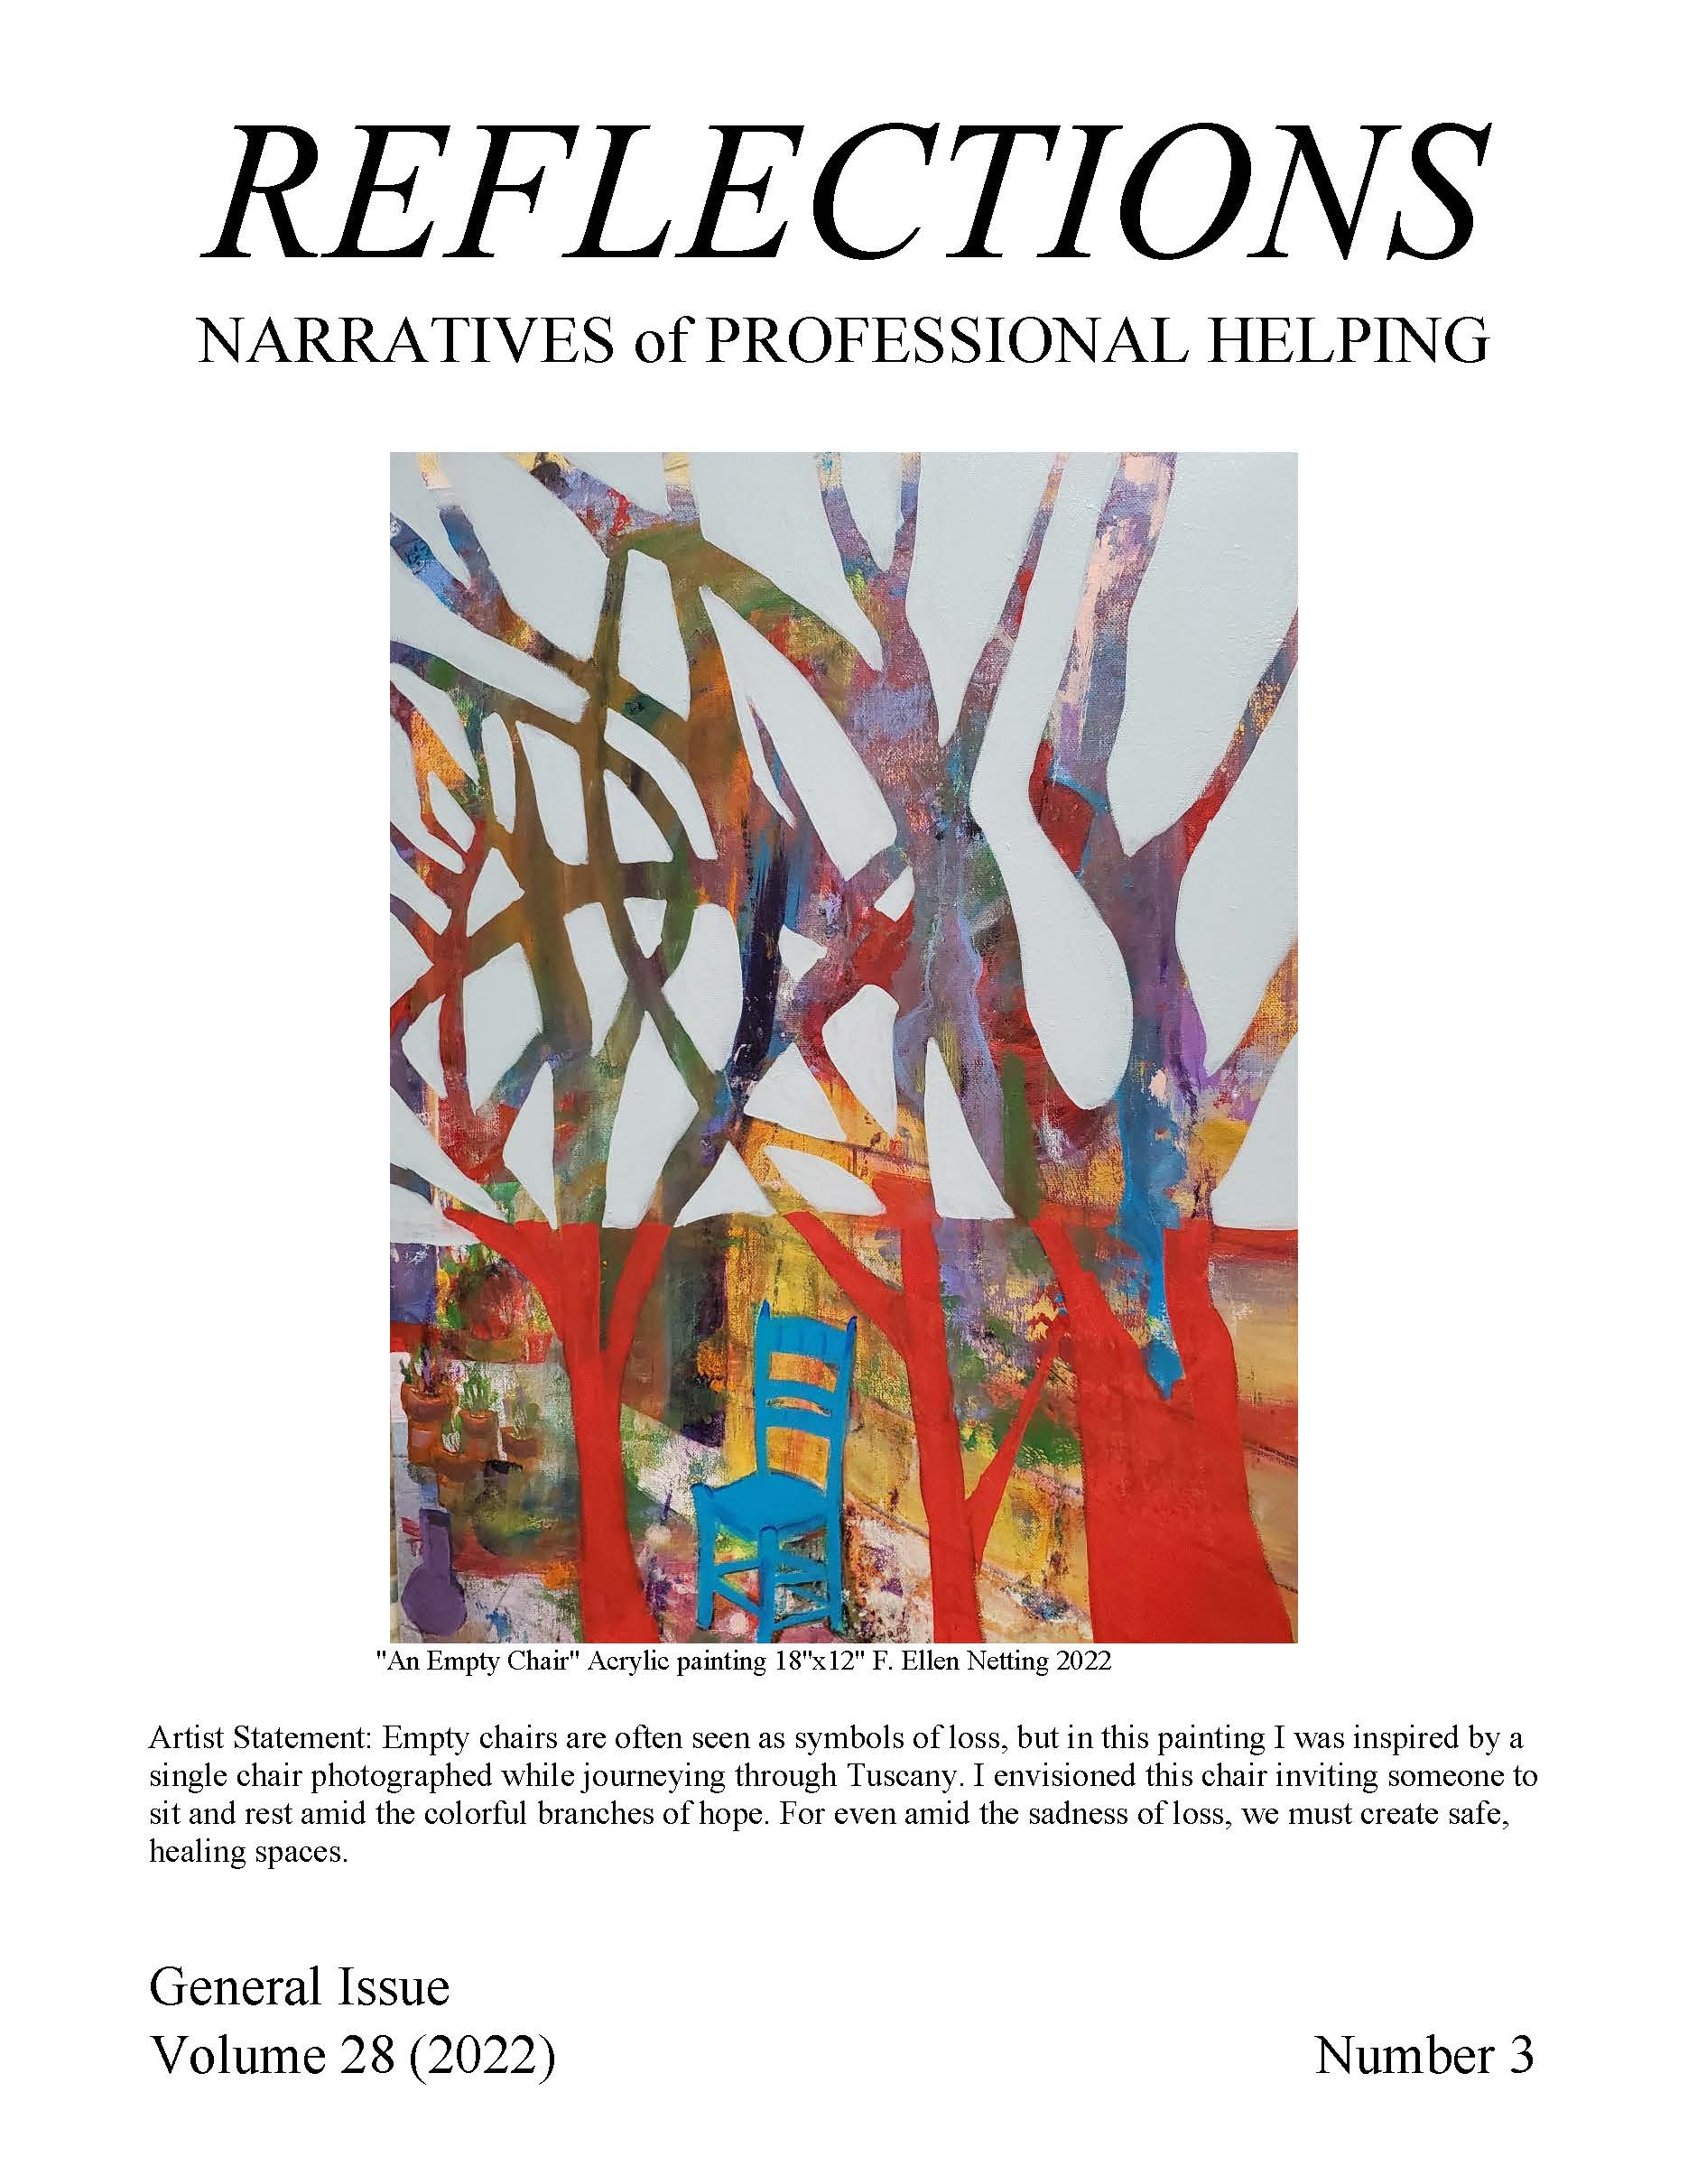 The cover of Reflections: Narratives of Professional Helping volume 28, number 3. It features art by F. Ellen Netting, an acrylic painting of an empty blue chair beneath vividly colorful trees.